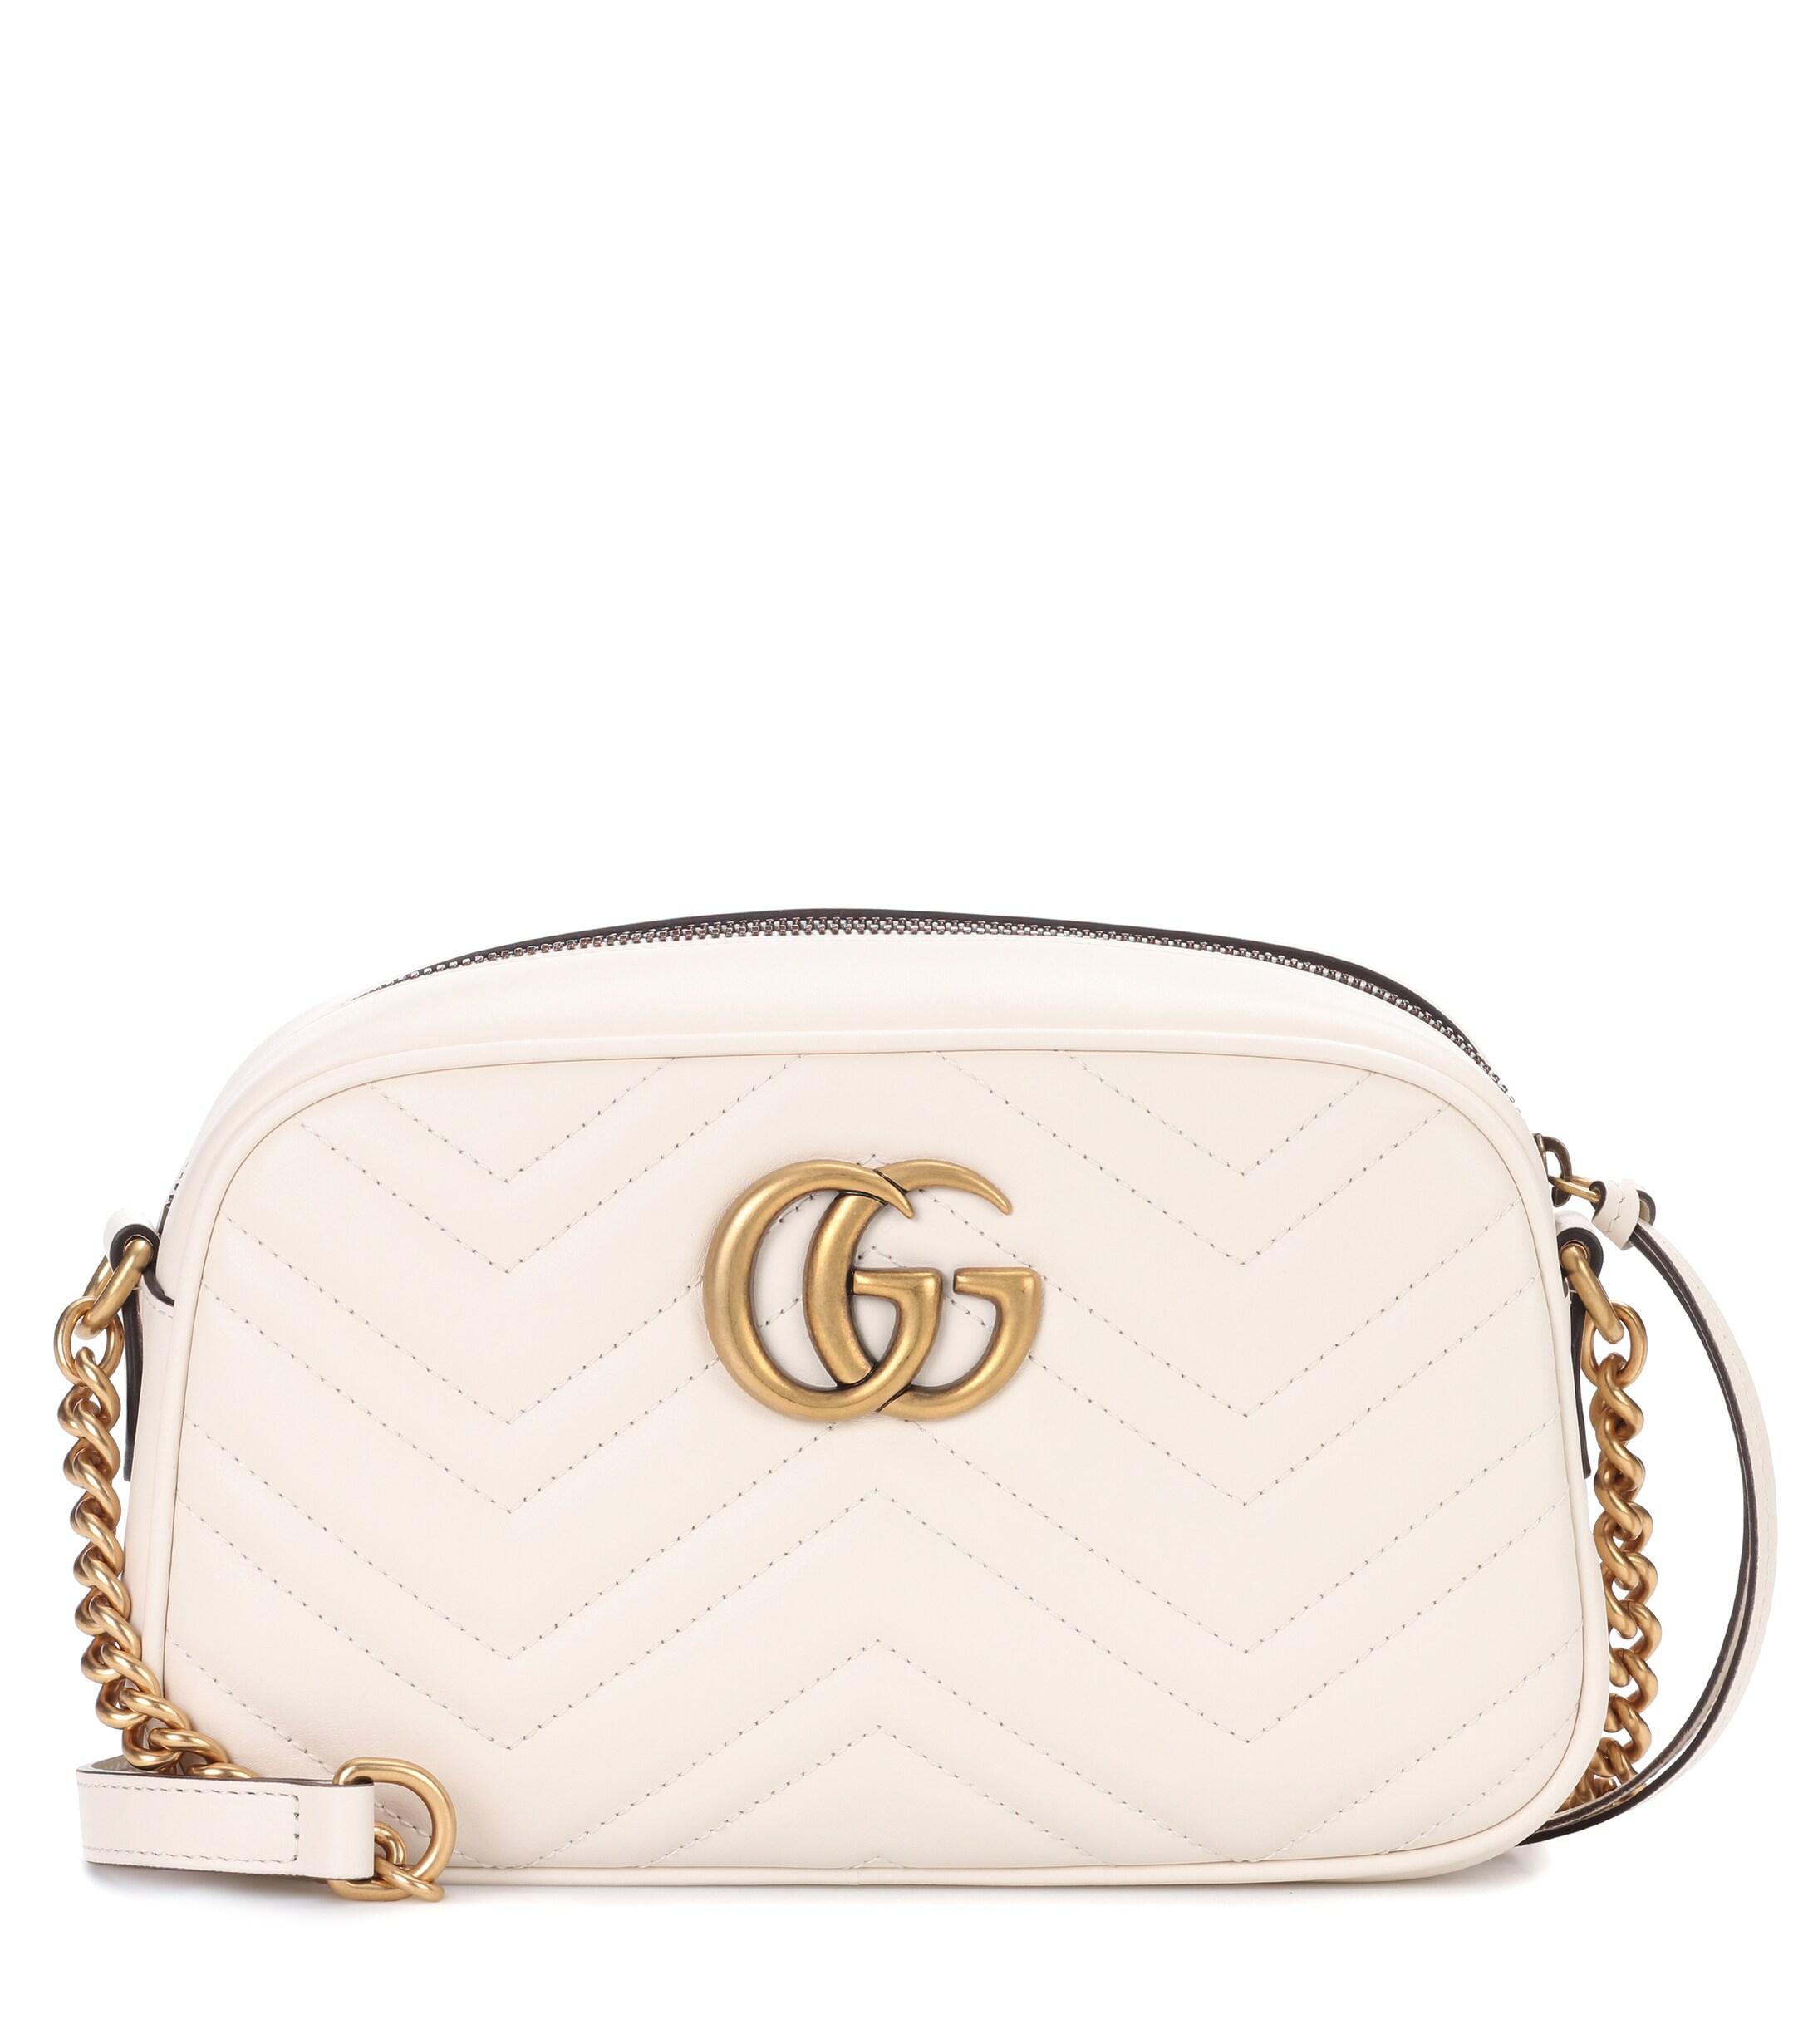 Gucci Leather GG Marmont Small Shoulder Bag in White - Lyst